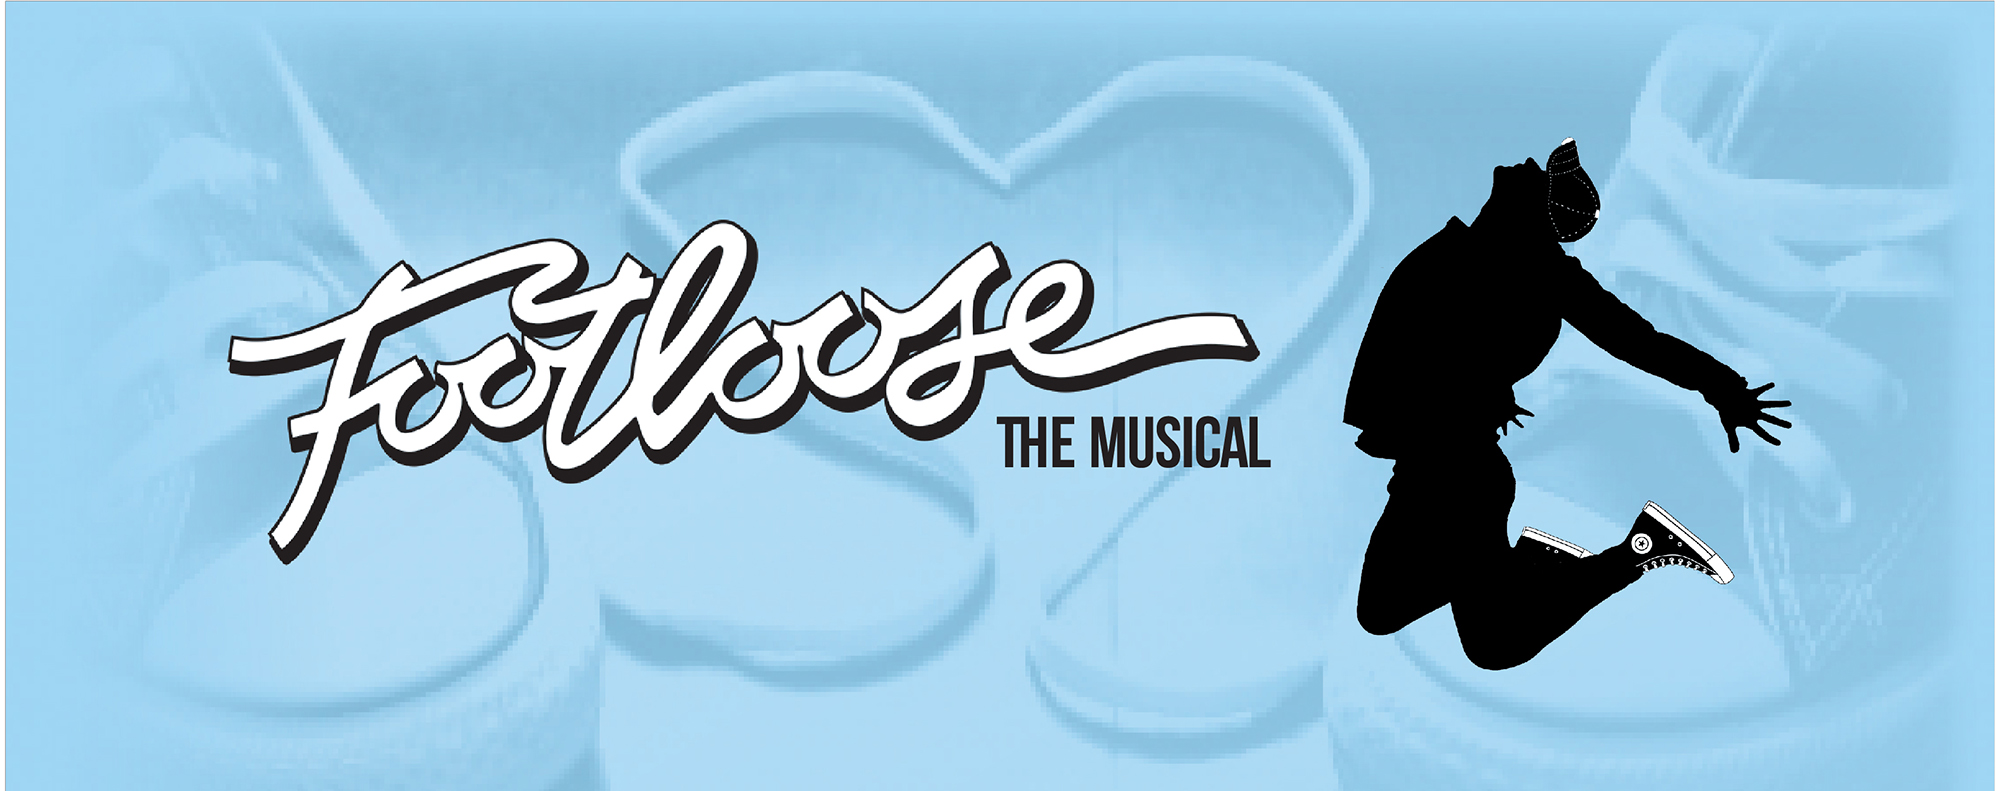 Ouachita’s School of Fine Arts to present “Footloose the Musical” April 21-24.